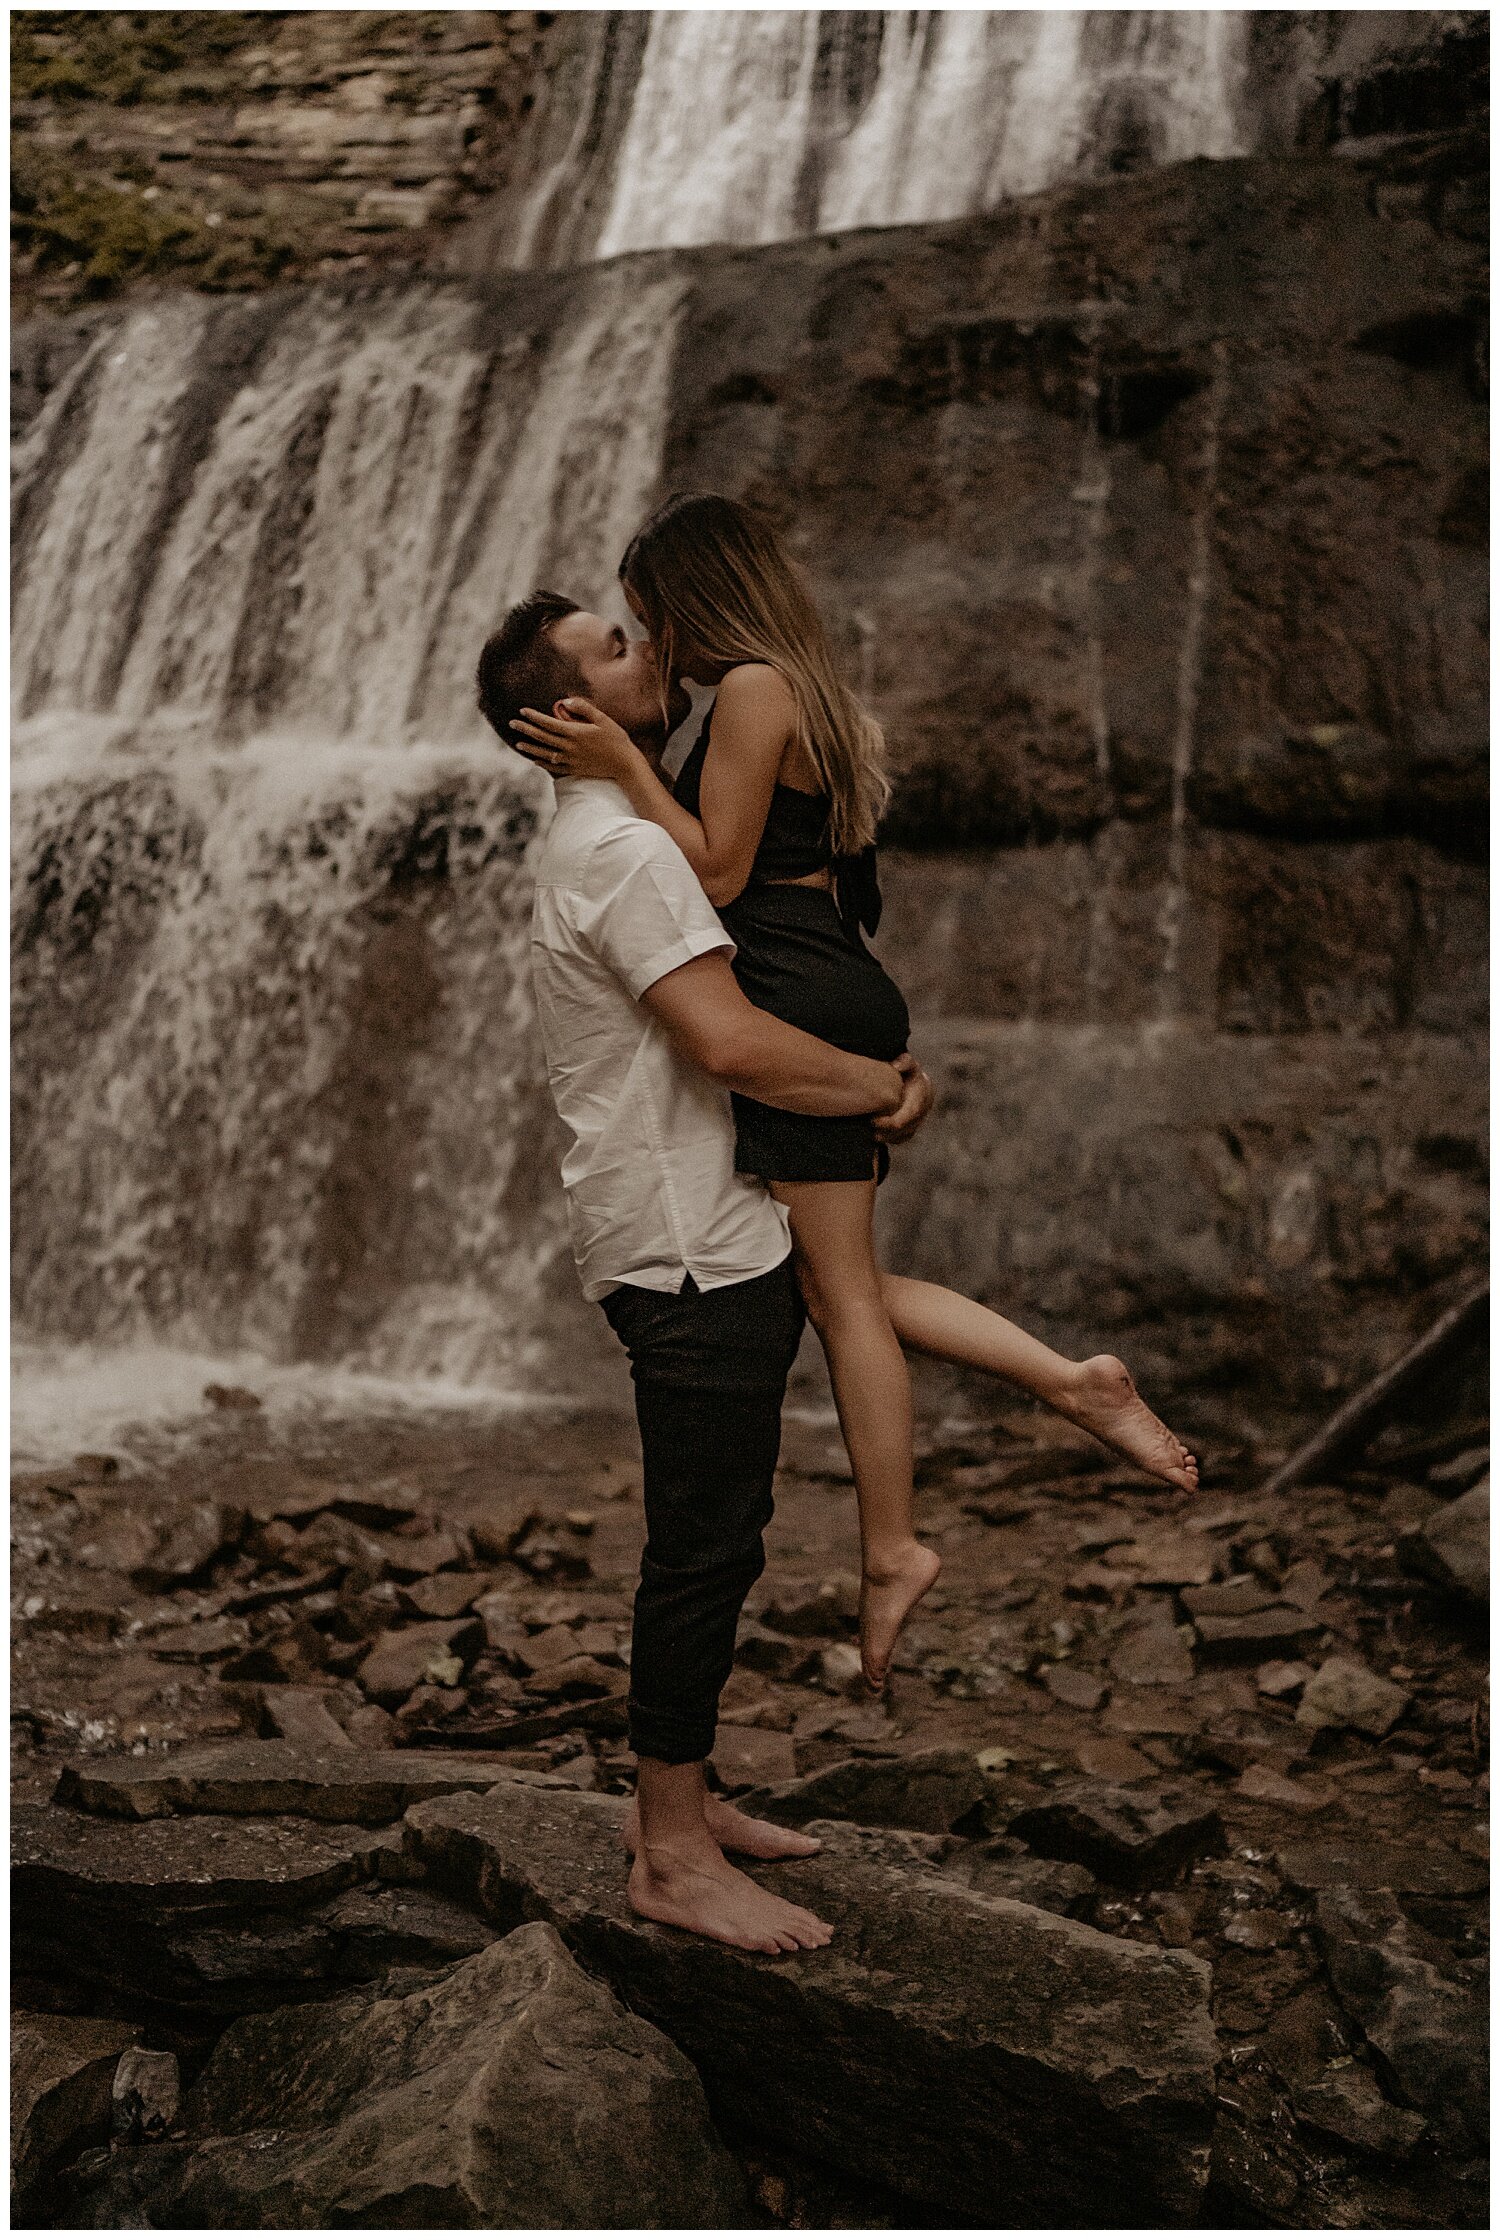 Cotton_Factory_And_Waterfall_Engagement_Session_Hamilton_Ontario_Wedding_Photographer_0123.jpg